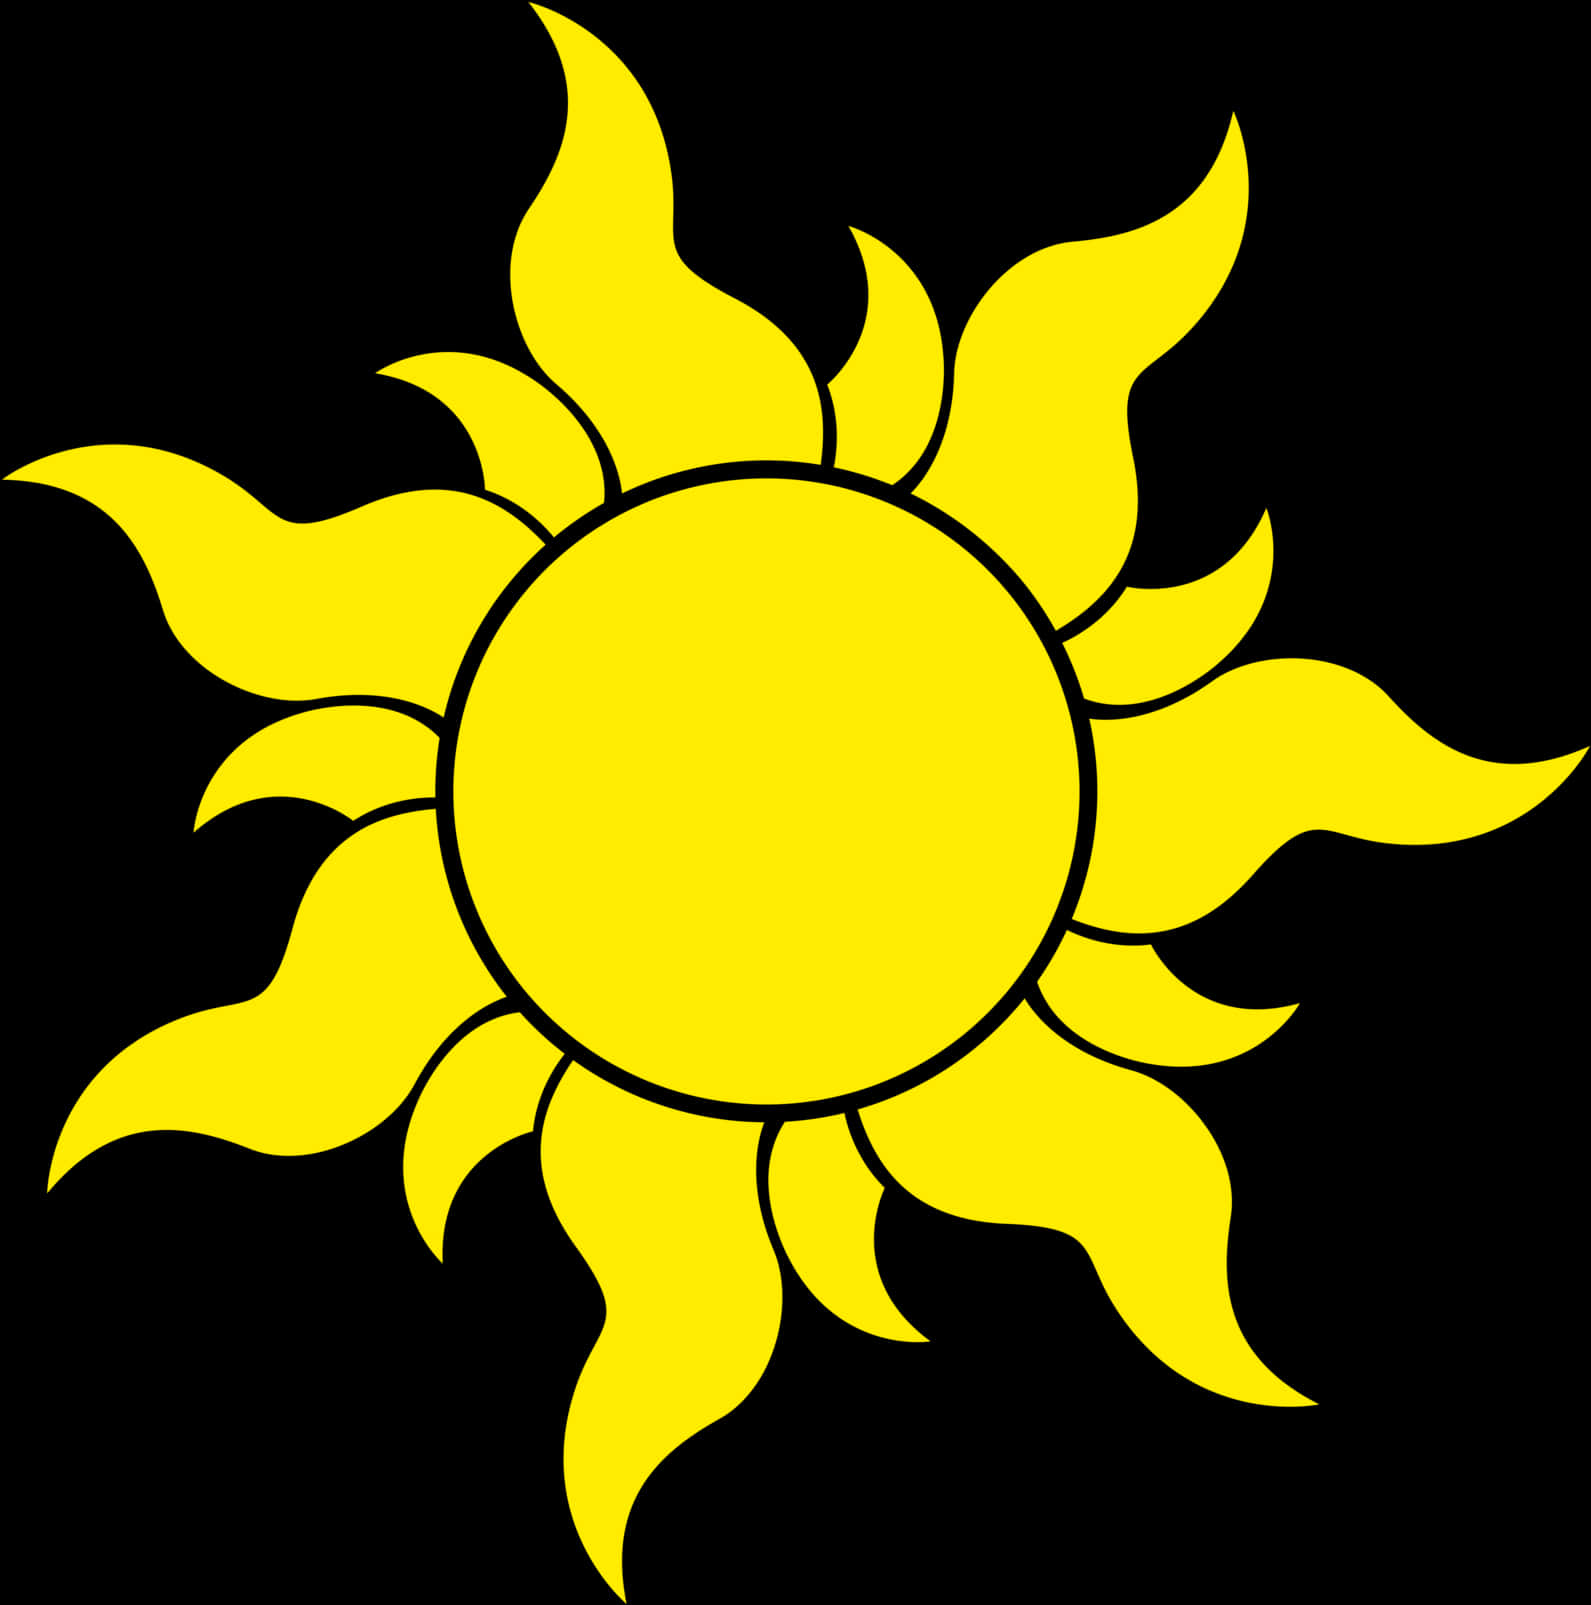 Yellow Sun Graphic Transparent Background PNG image